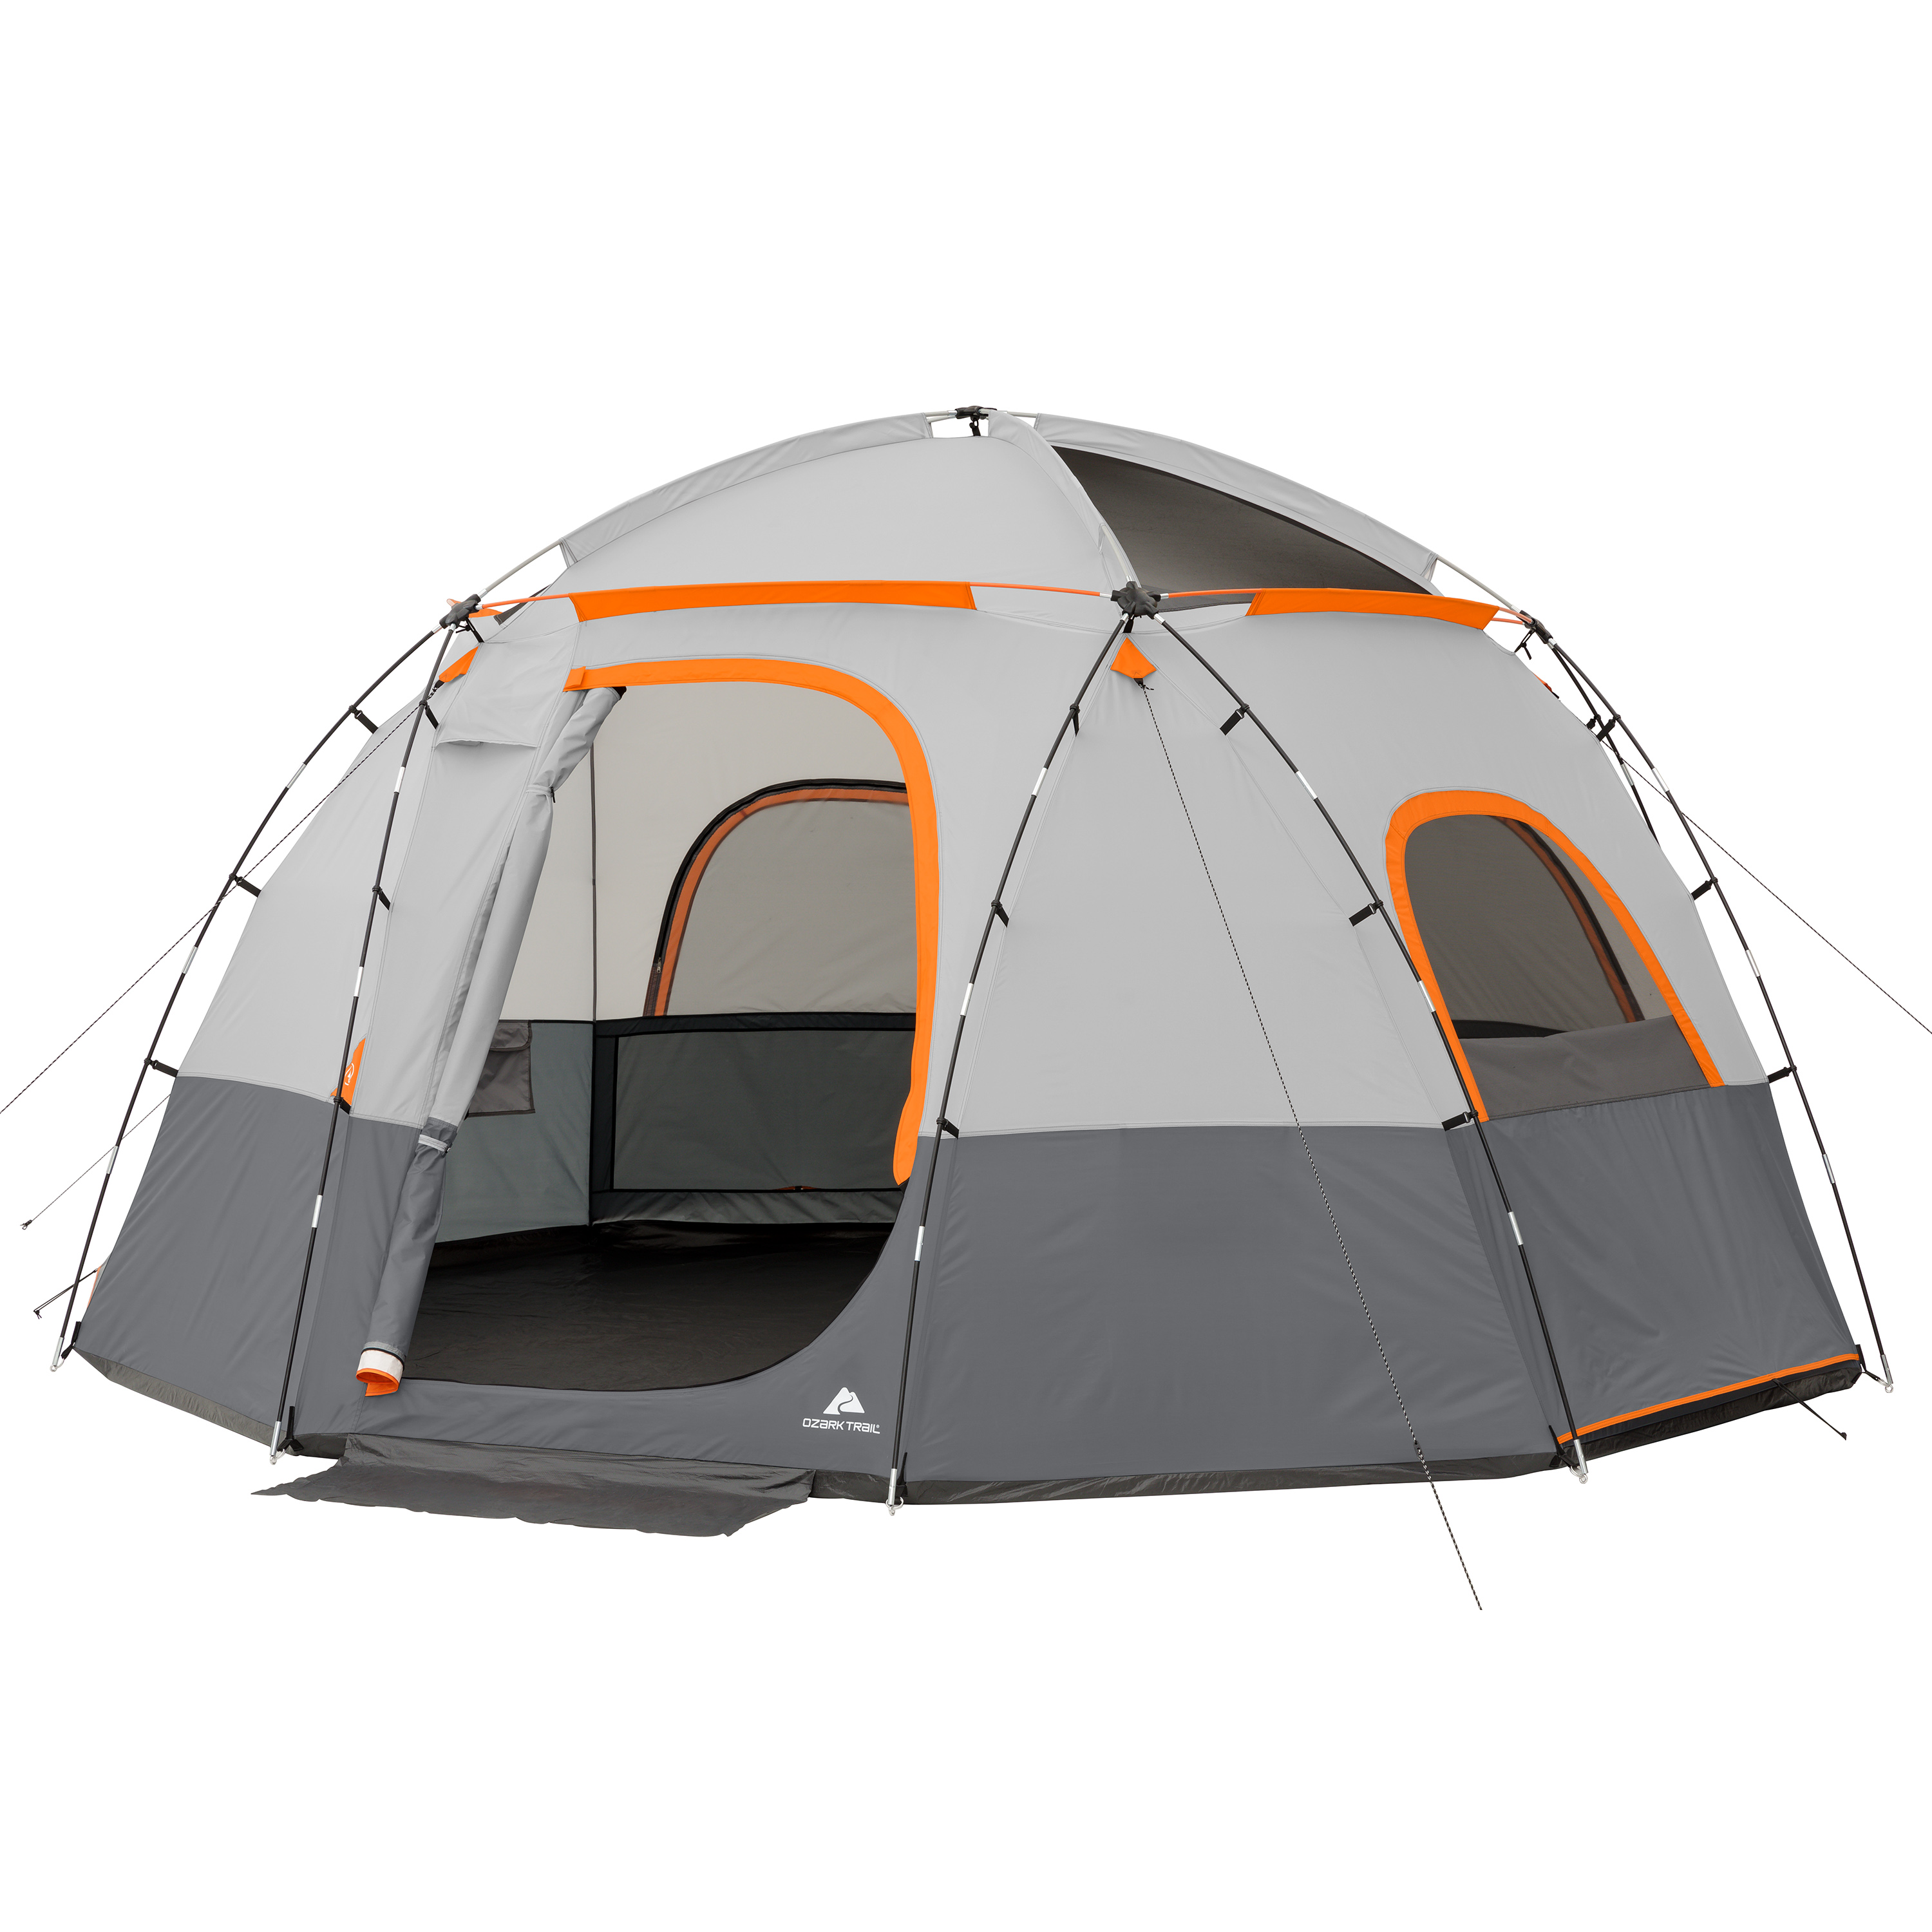 Ozark Trail 15’ x 15’ 9-Person Lighted Sphere Tent, 30.97 lbs - image 2 of 8